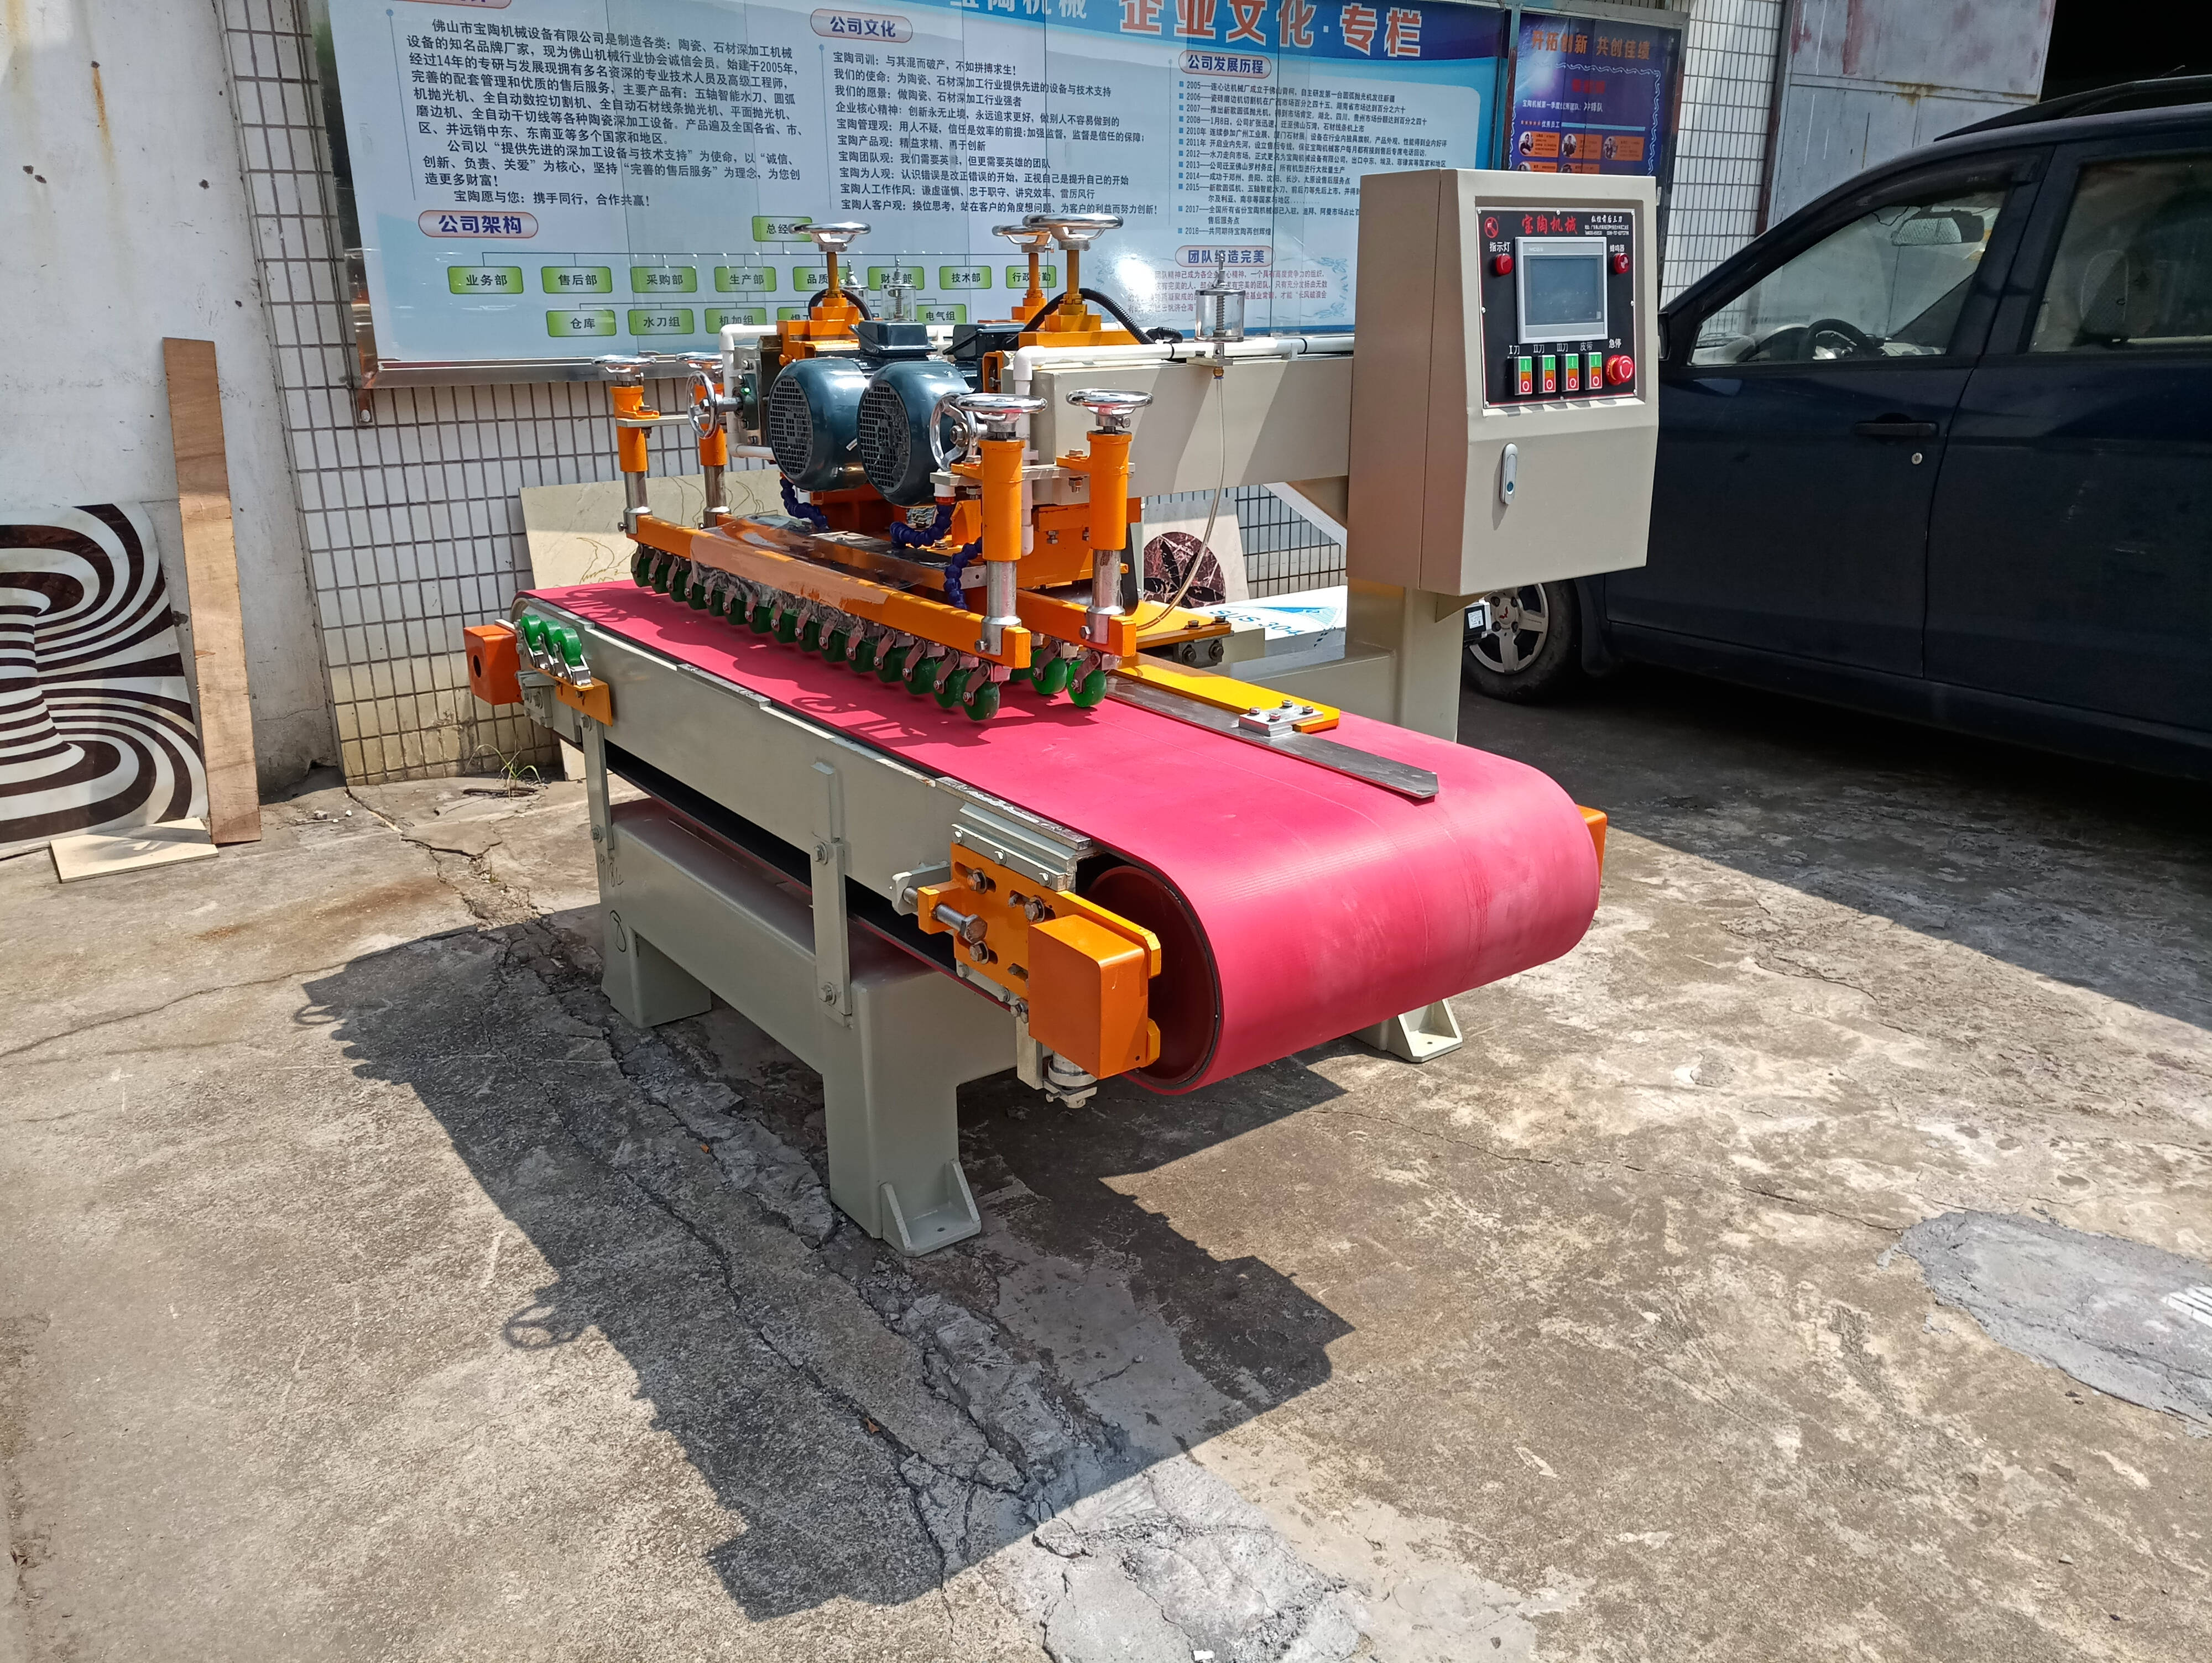 There are six different types of porcelain tile cutting machines(图4)